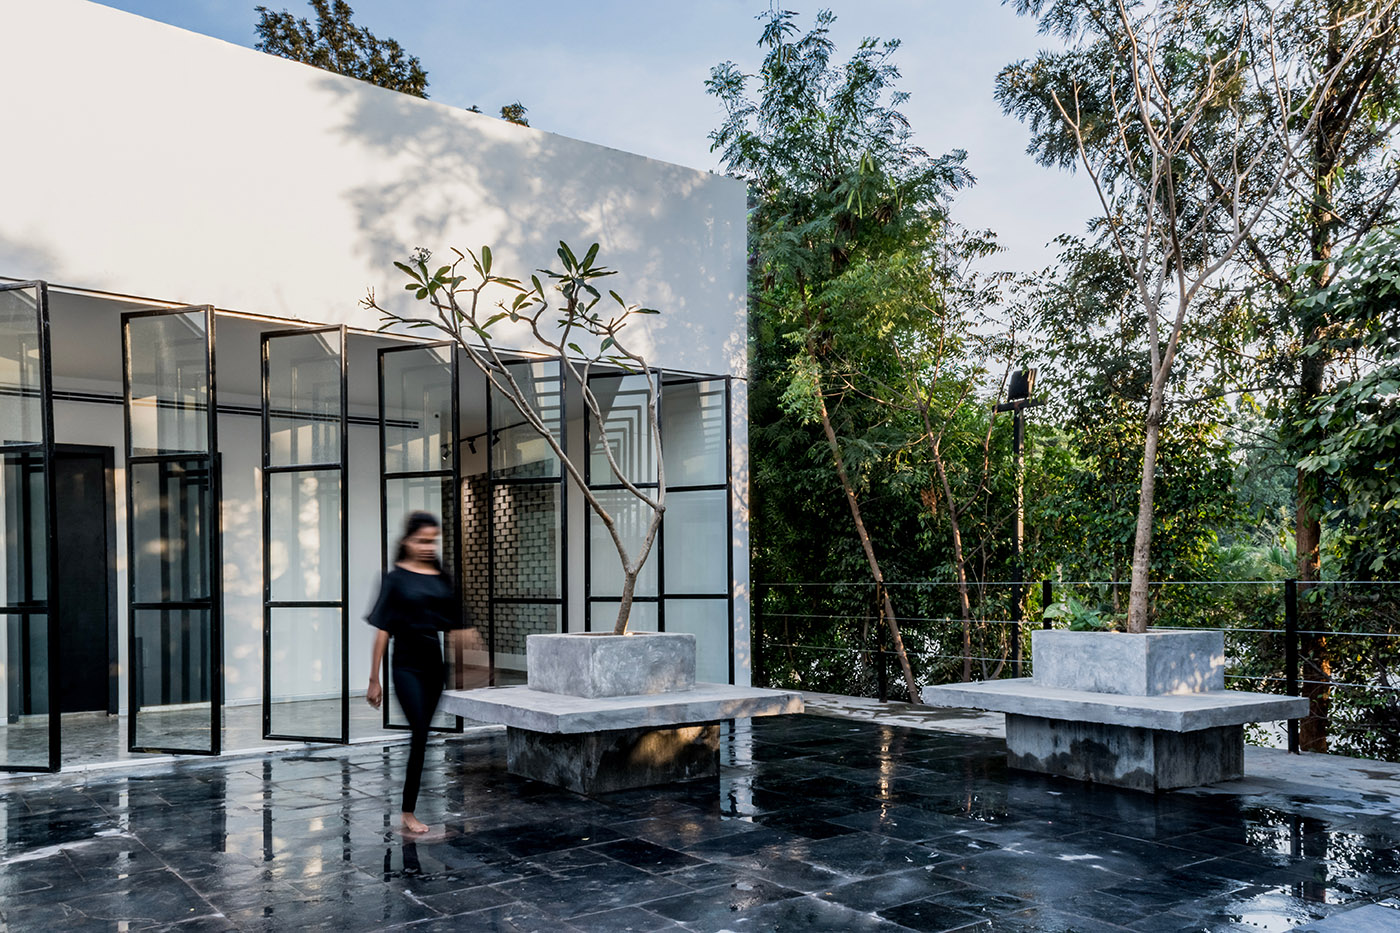 Myst Salon and Spa, from the tradition of the first Indian barber shops, a wellness experience among the foliage and the design